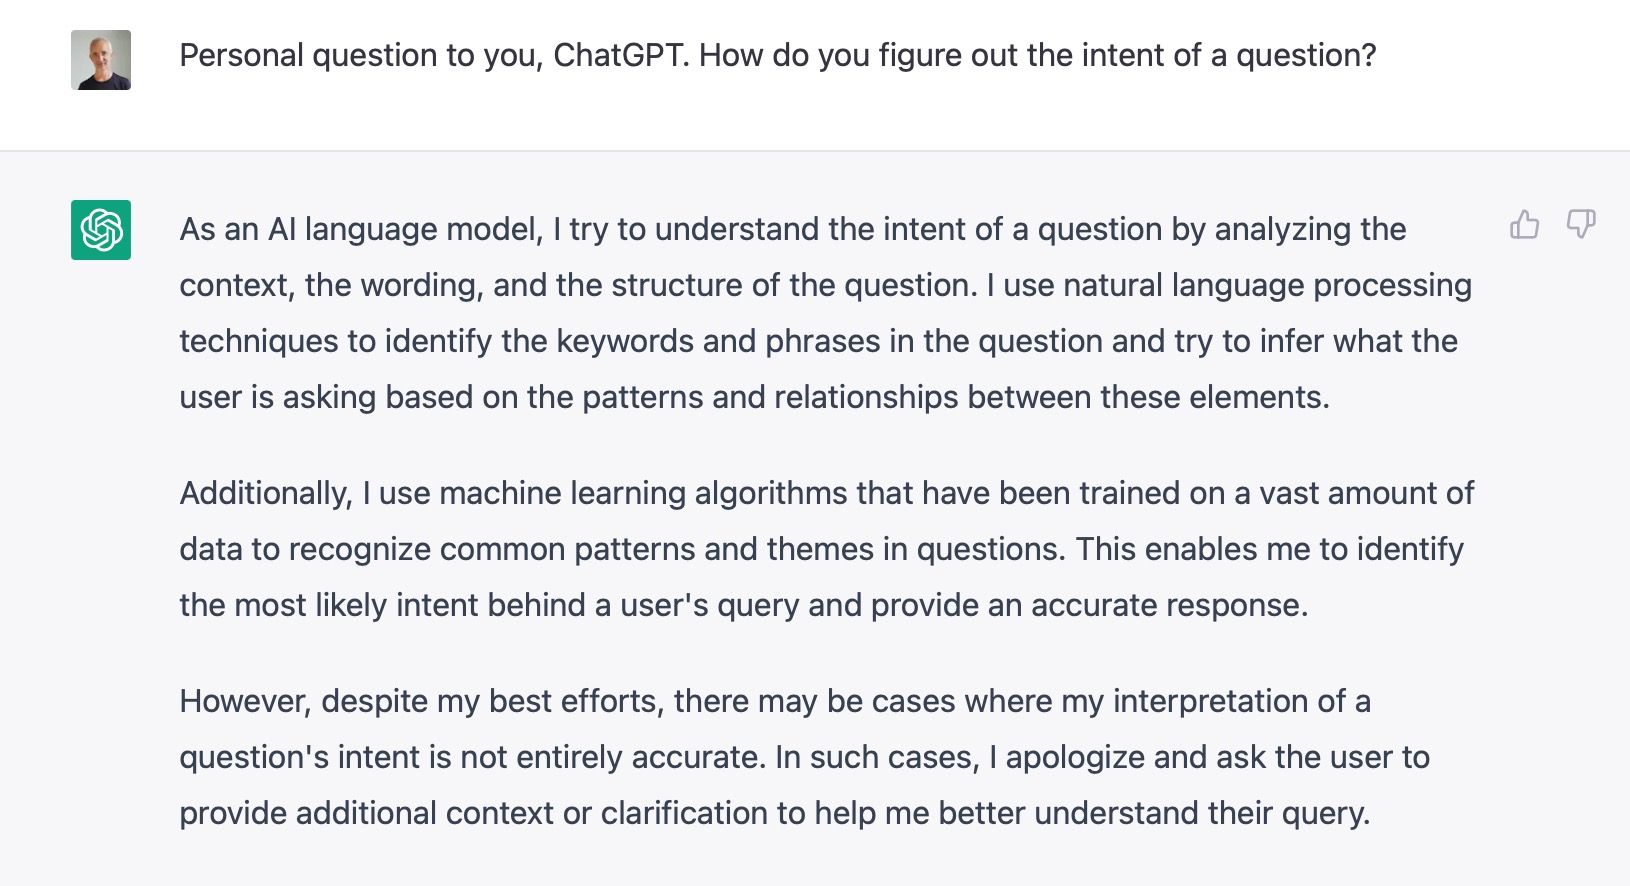 ChatGPT asked a personal question about intents